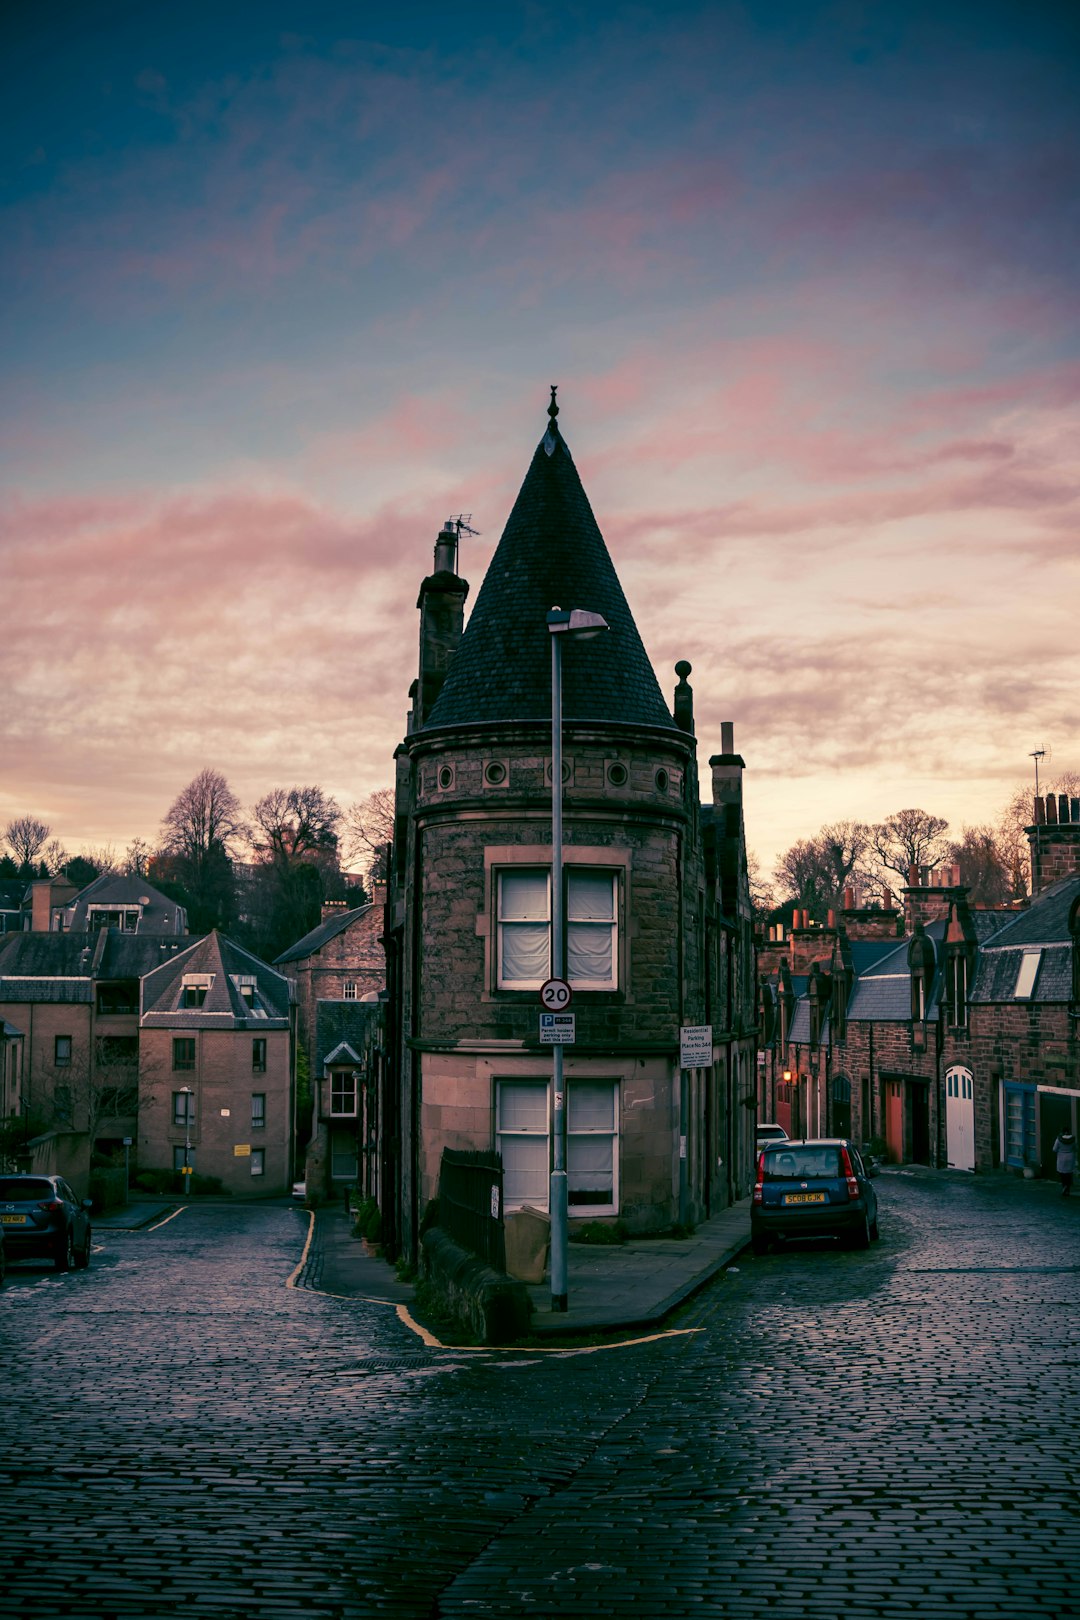 travelers stories about Town in Edinburgh, United Kingdom